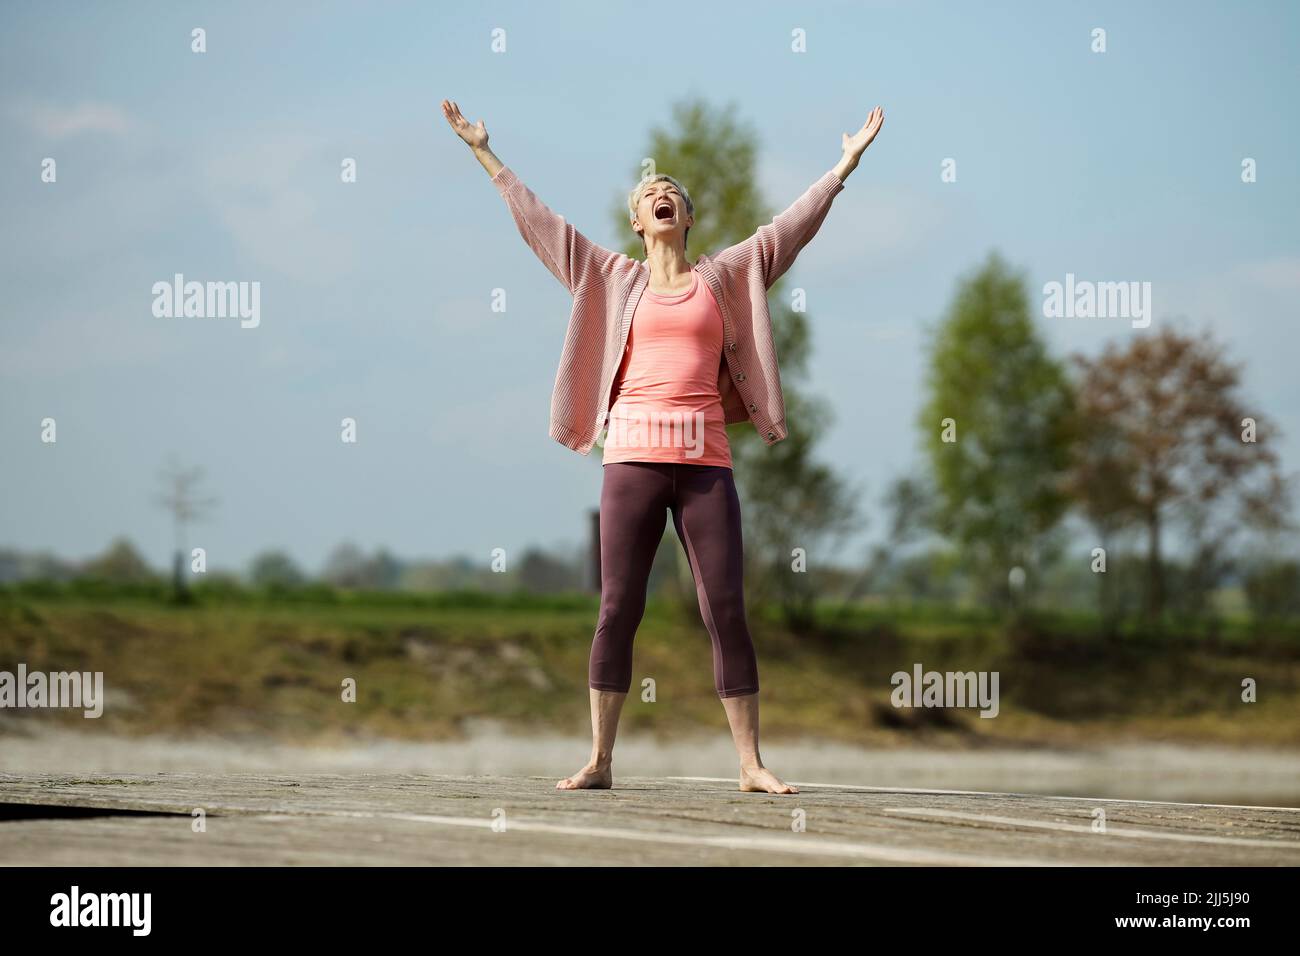 Mature woman standing with arms raised screaming on pier Stock Photo